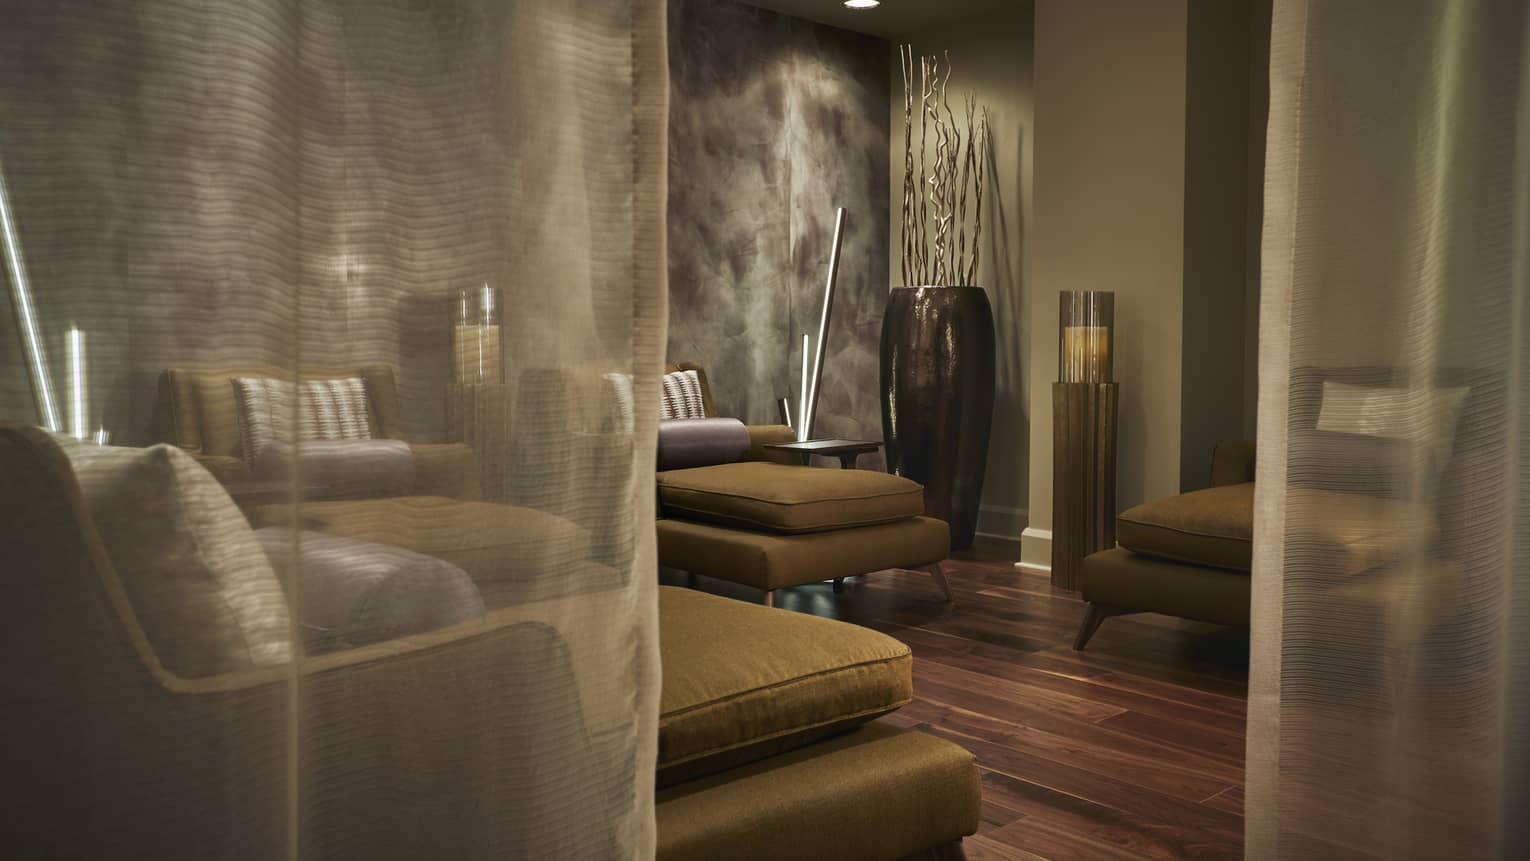 Sheer curtains by plush gold armchairs in Forbes Five Star Spa